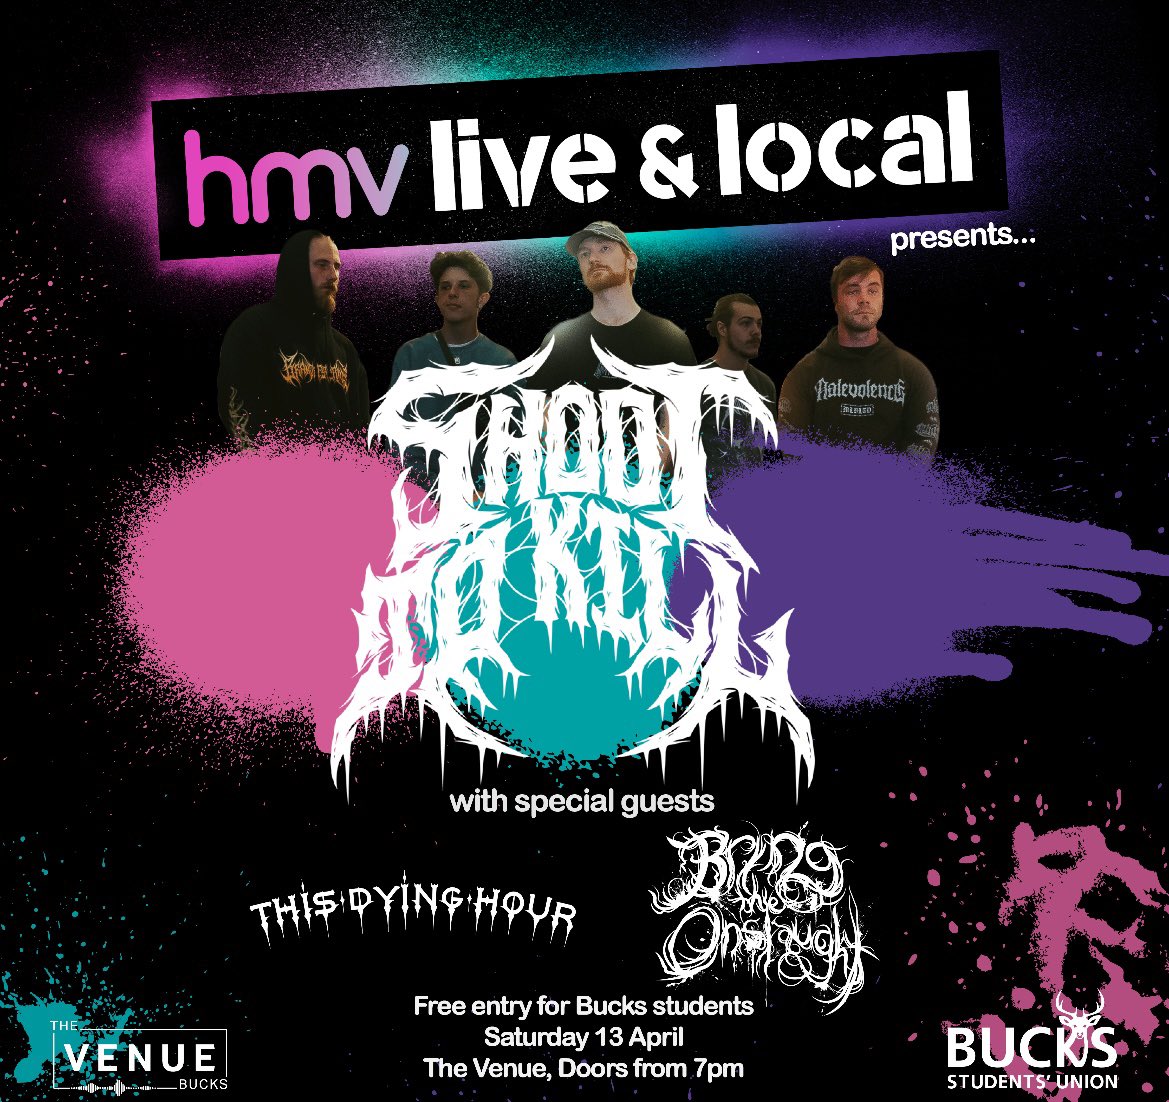 HMV Live and Local is back🤩 This Saturday the best bands in Bucks performing at The Venue! We are joined by Shoot to Kill, Bring the Onslaught, and This Dying Hour to bring you a night of live music 🥁🎸 📅Saturday 13th April ⏰7pm - 11pm 📍The Venue